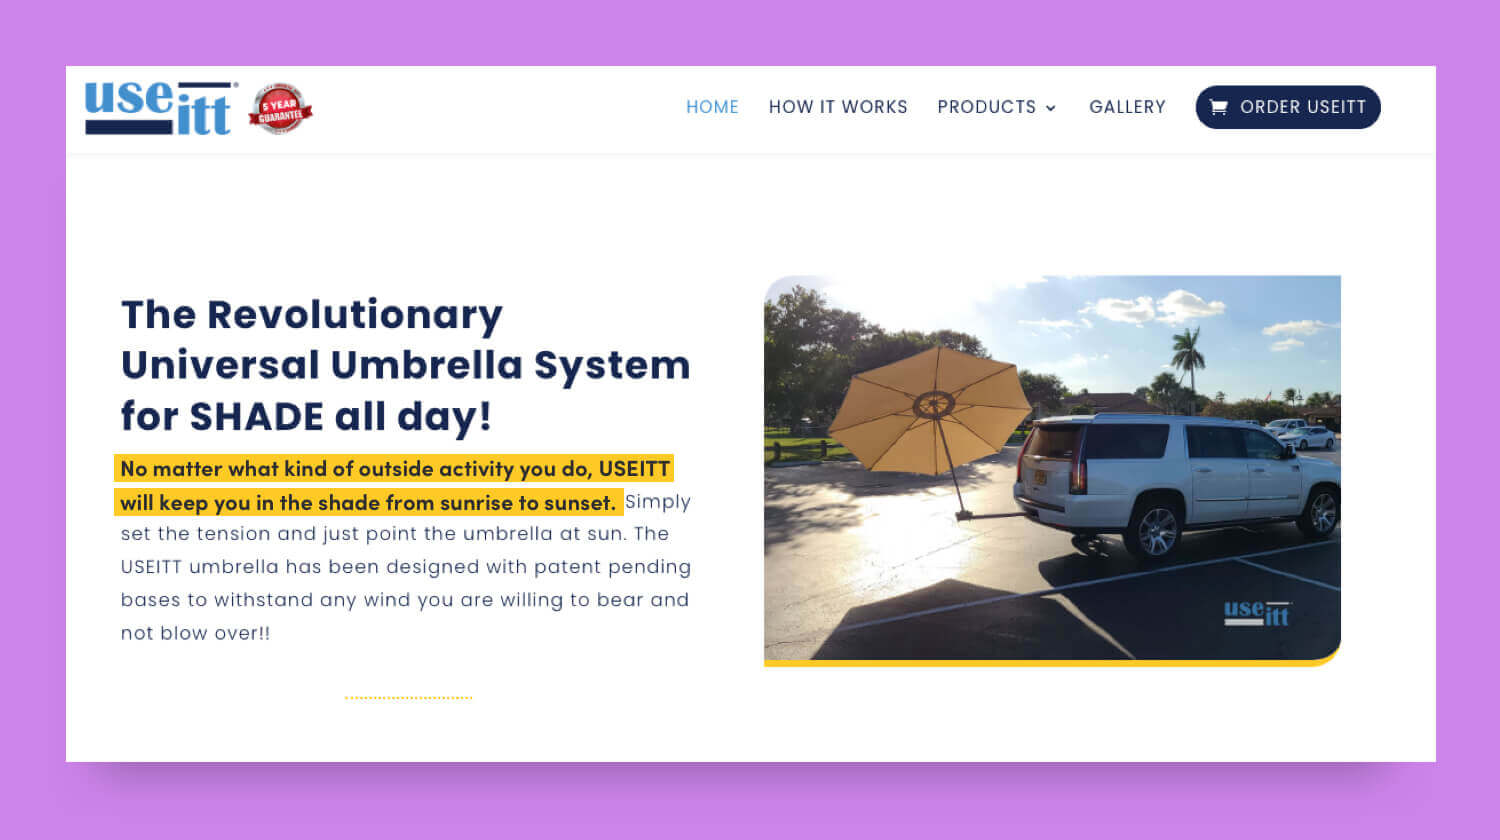 A screenshot from the USEITT website. There is a photo of a white SUV in a sunny parking lot, with a tan beach umbrella attached to the tow hitch. The text next to the photo is magnified to show the phrase: No matter what kind of outside activity you do, USEITT will keep you in the shade from sunrise to sunset.